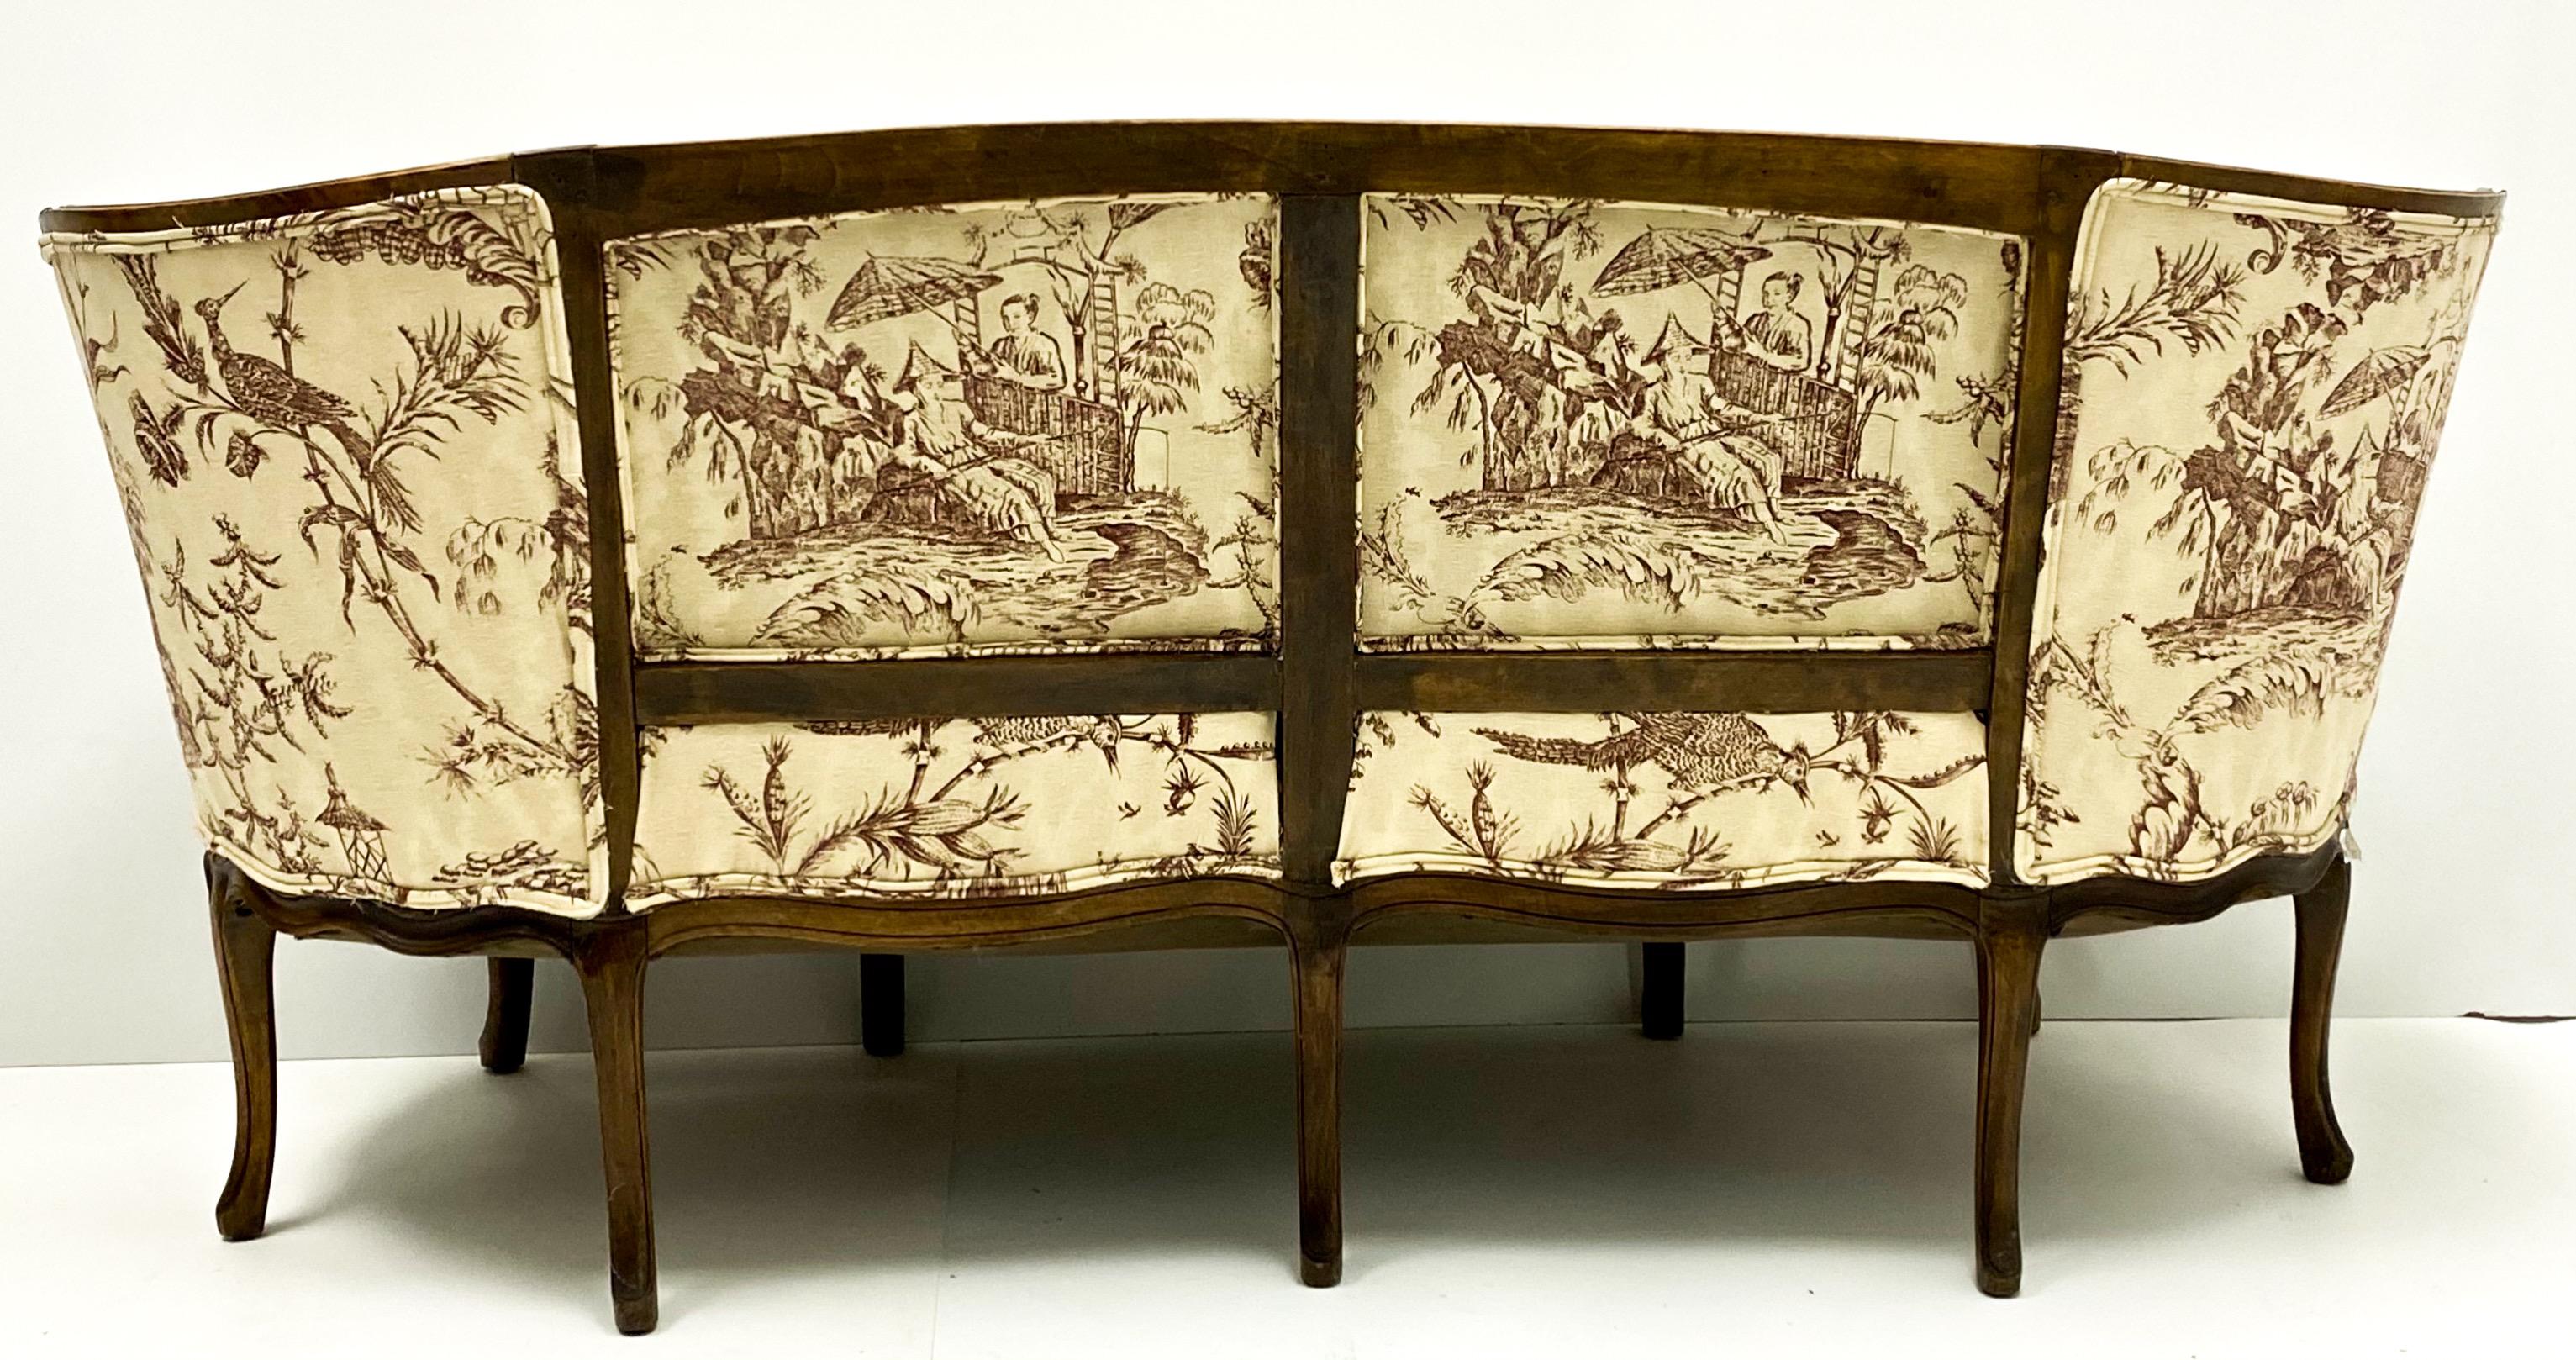 Love this! This is a 19th century Louis XVI style carved walnut French canapé in a chinoiserie linen. It is in very good condition, and the cushion is a nice plump down. The upholstery is recent appears to be a printed cotton- linen blend. The